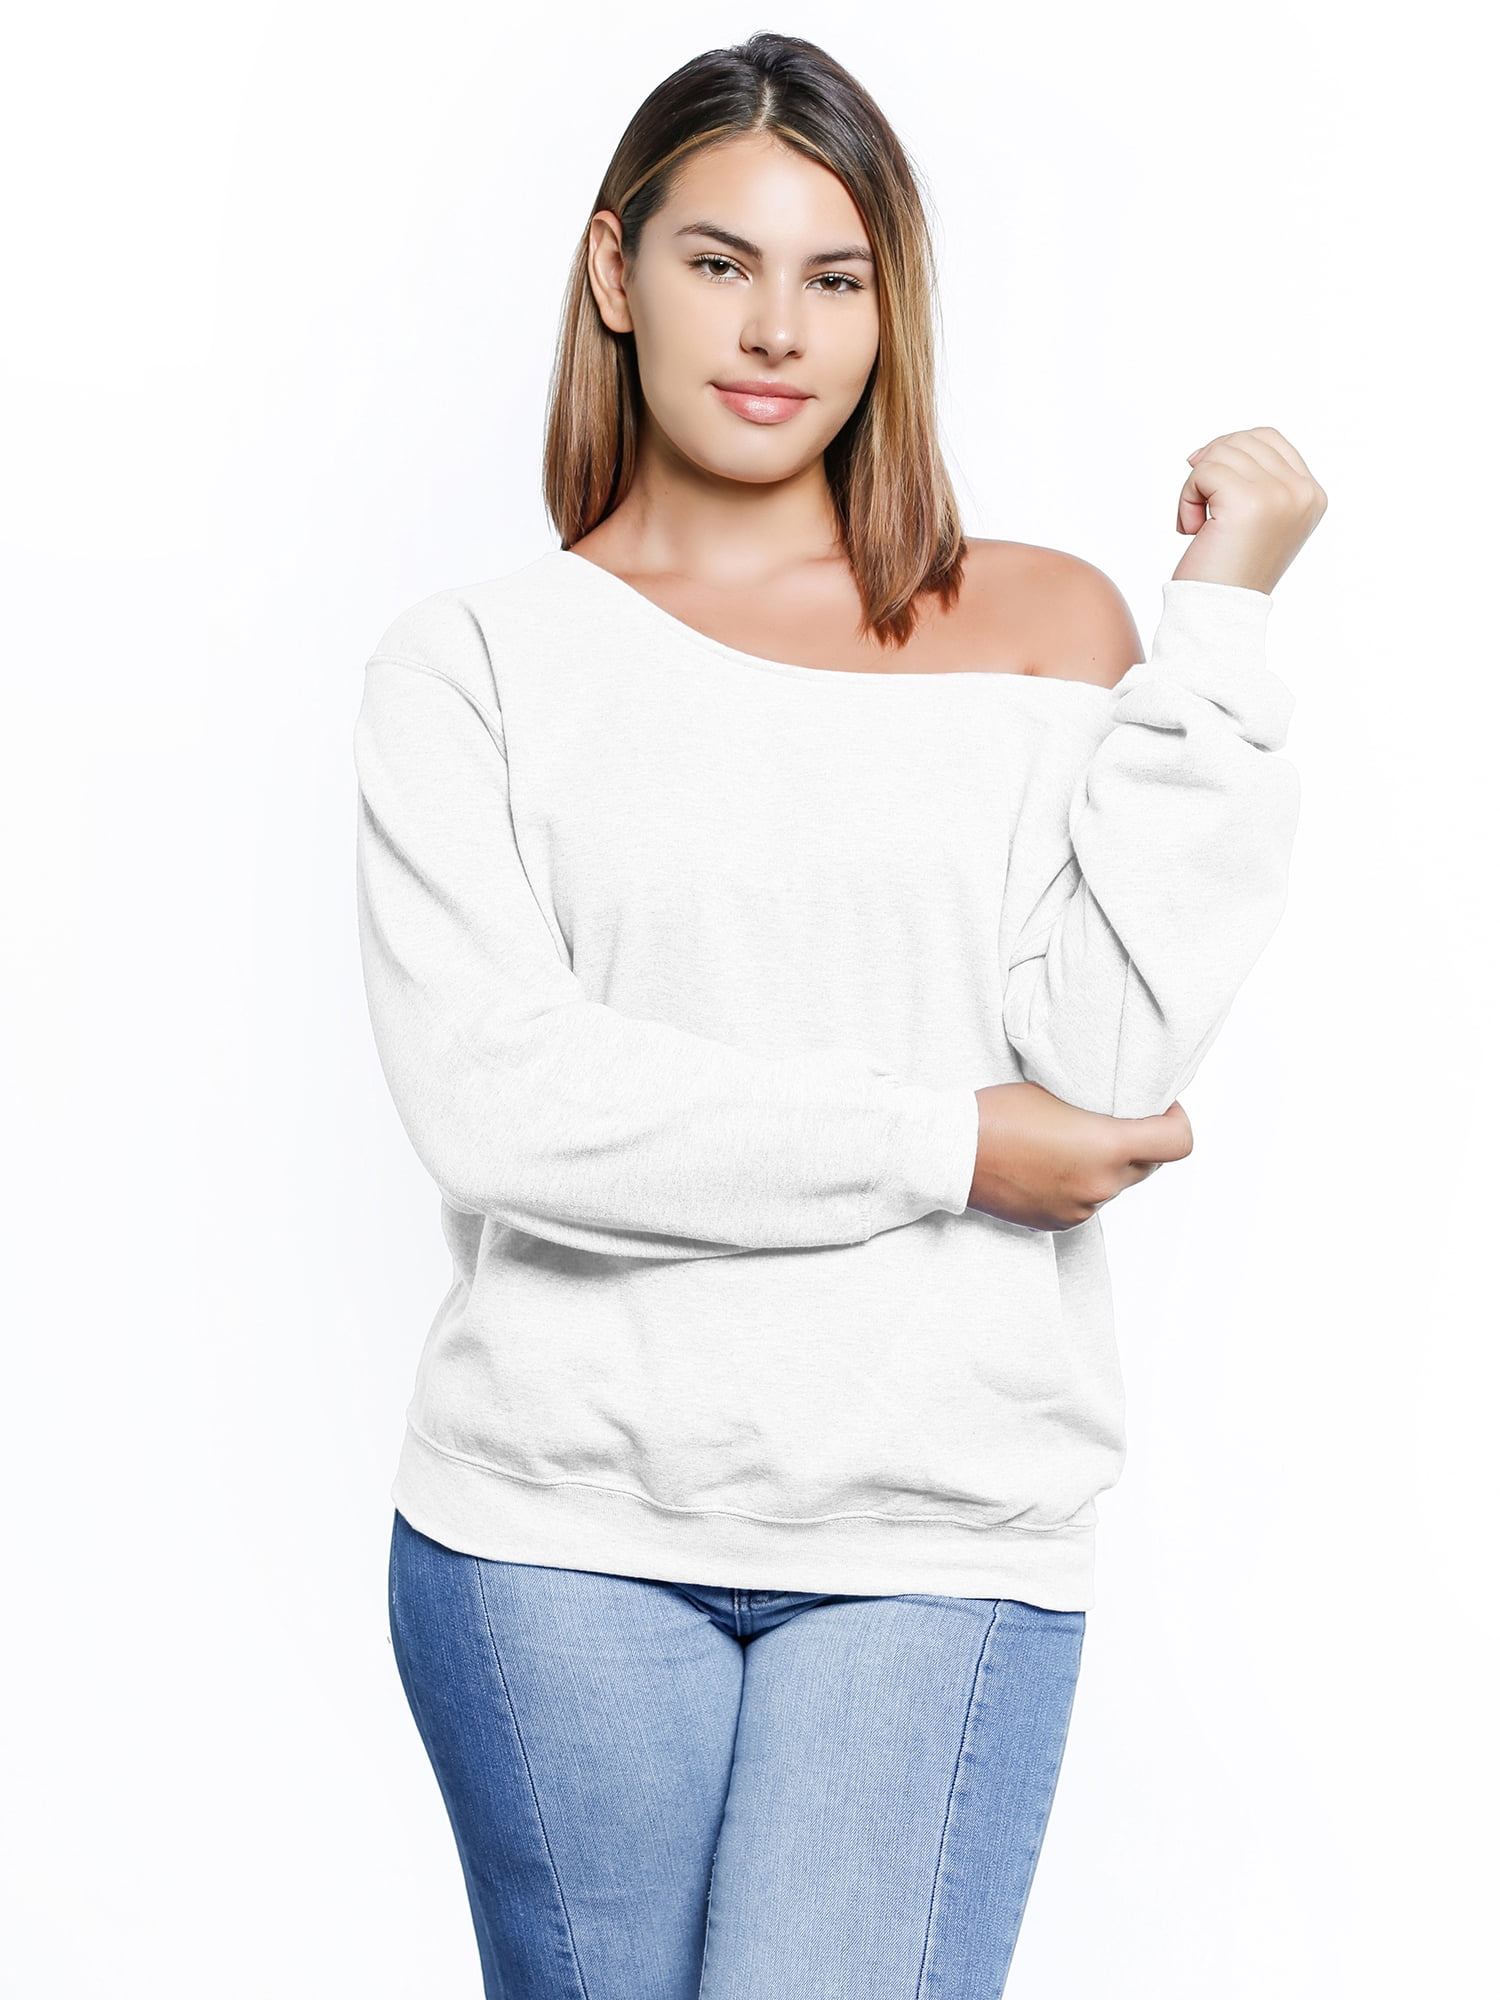 WOMENS ONE OFF SHOULDER BATWING LONG SLEEVE SLOUCHY T-SHIRT TOP PLUS SIZES 8-26 